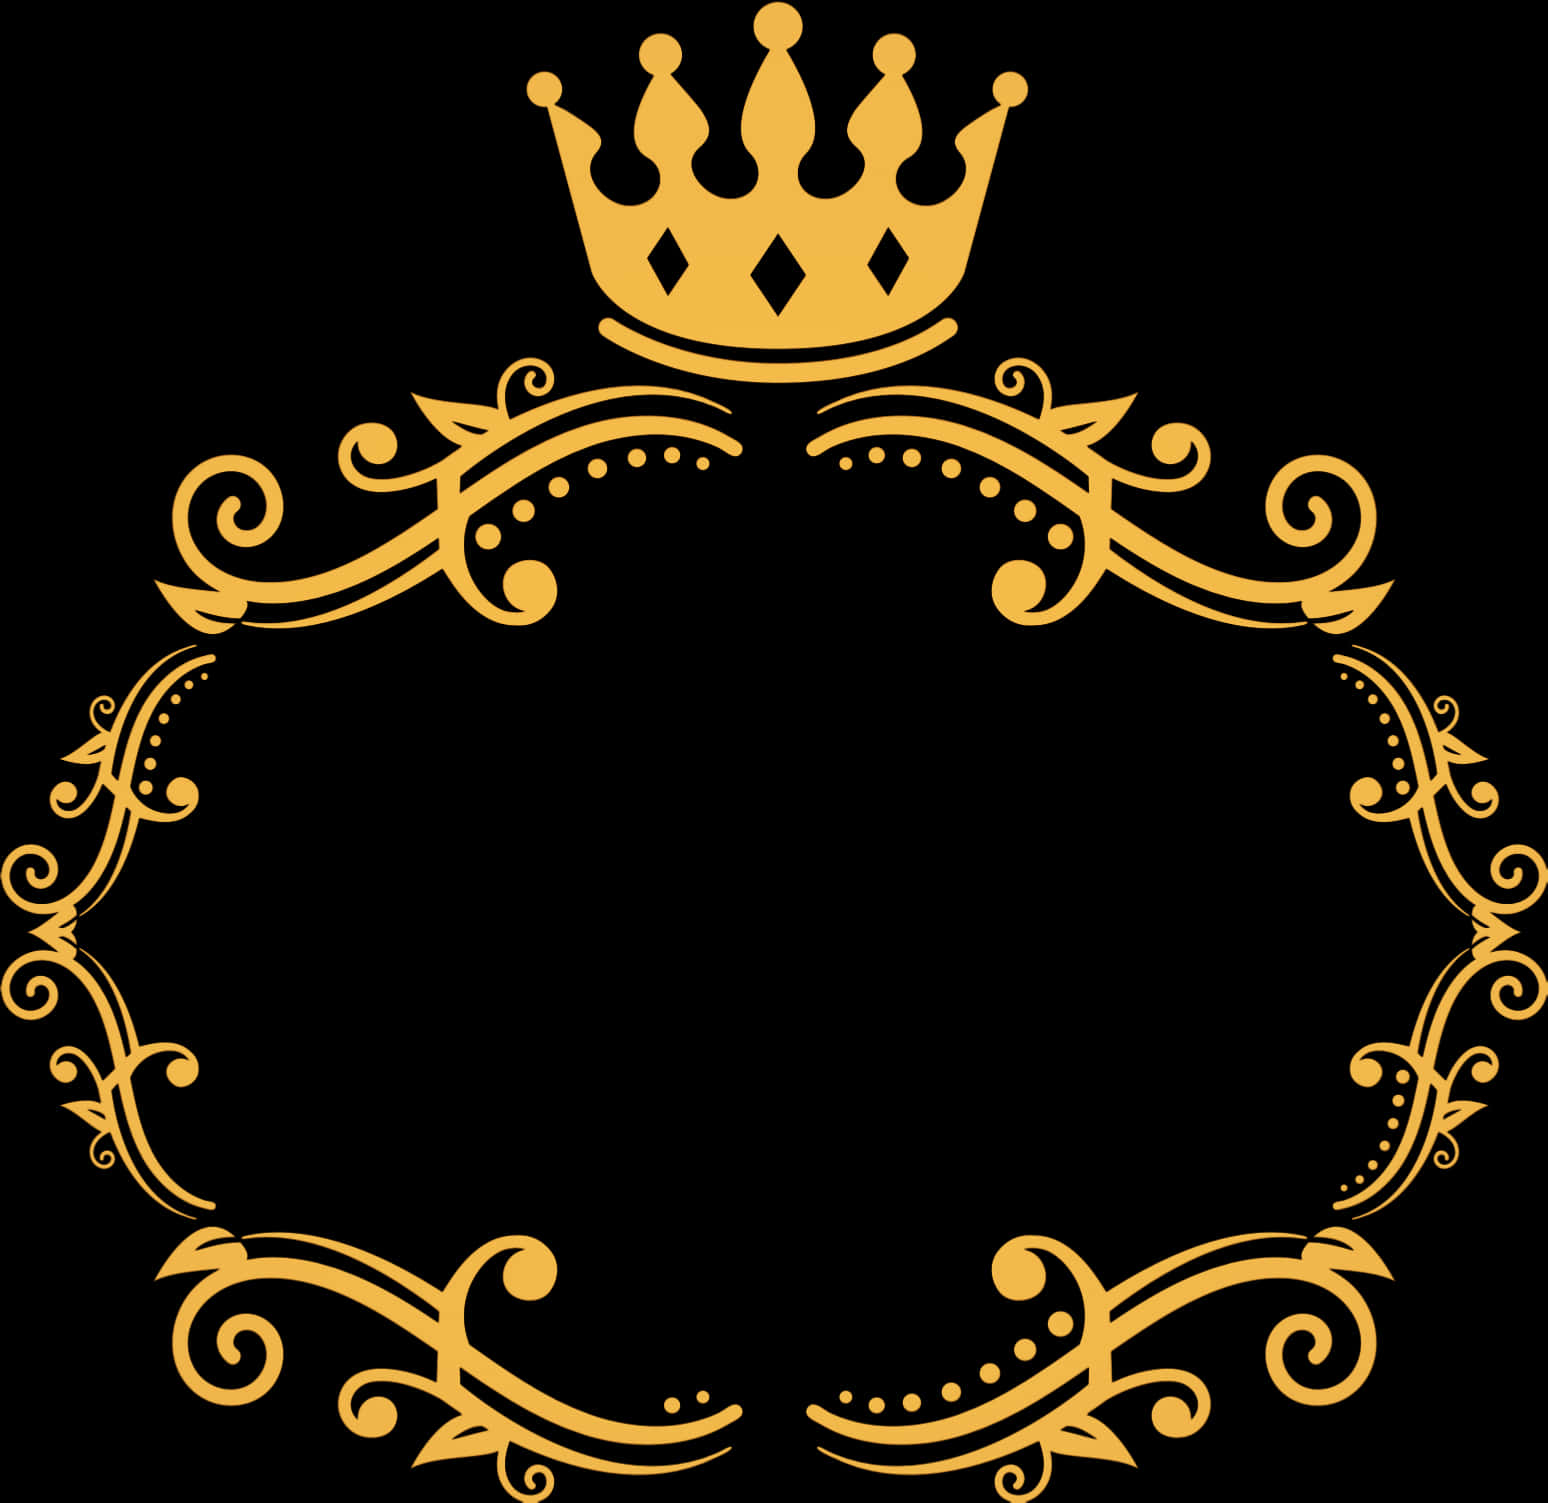 A Gold Crown And Swirls With A Black Background